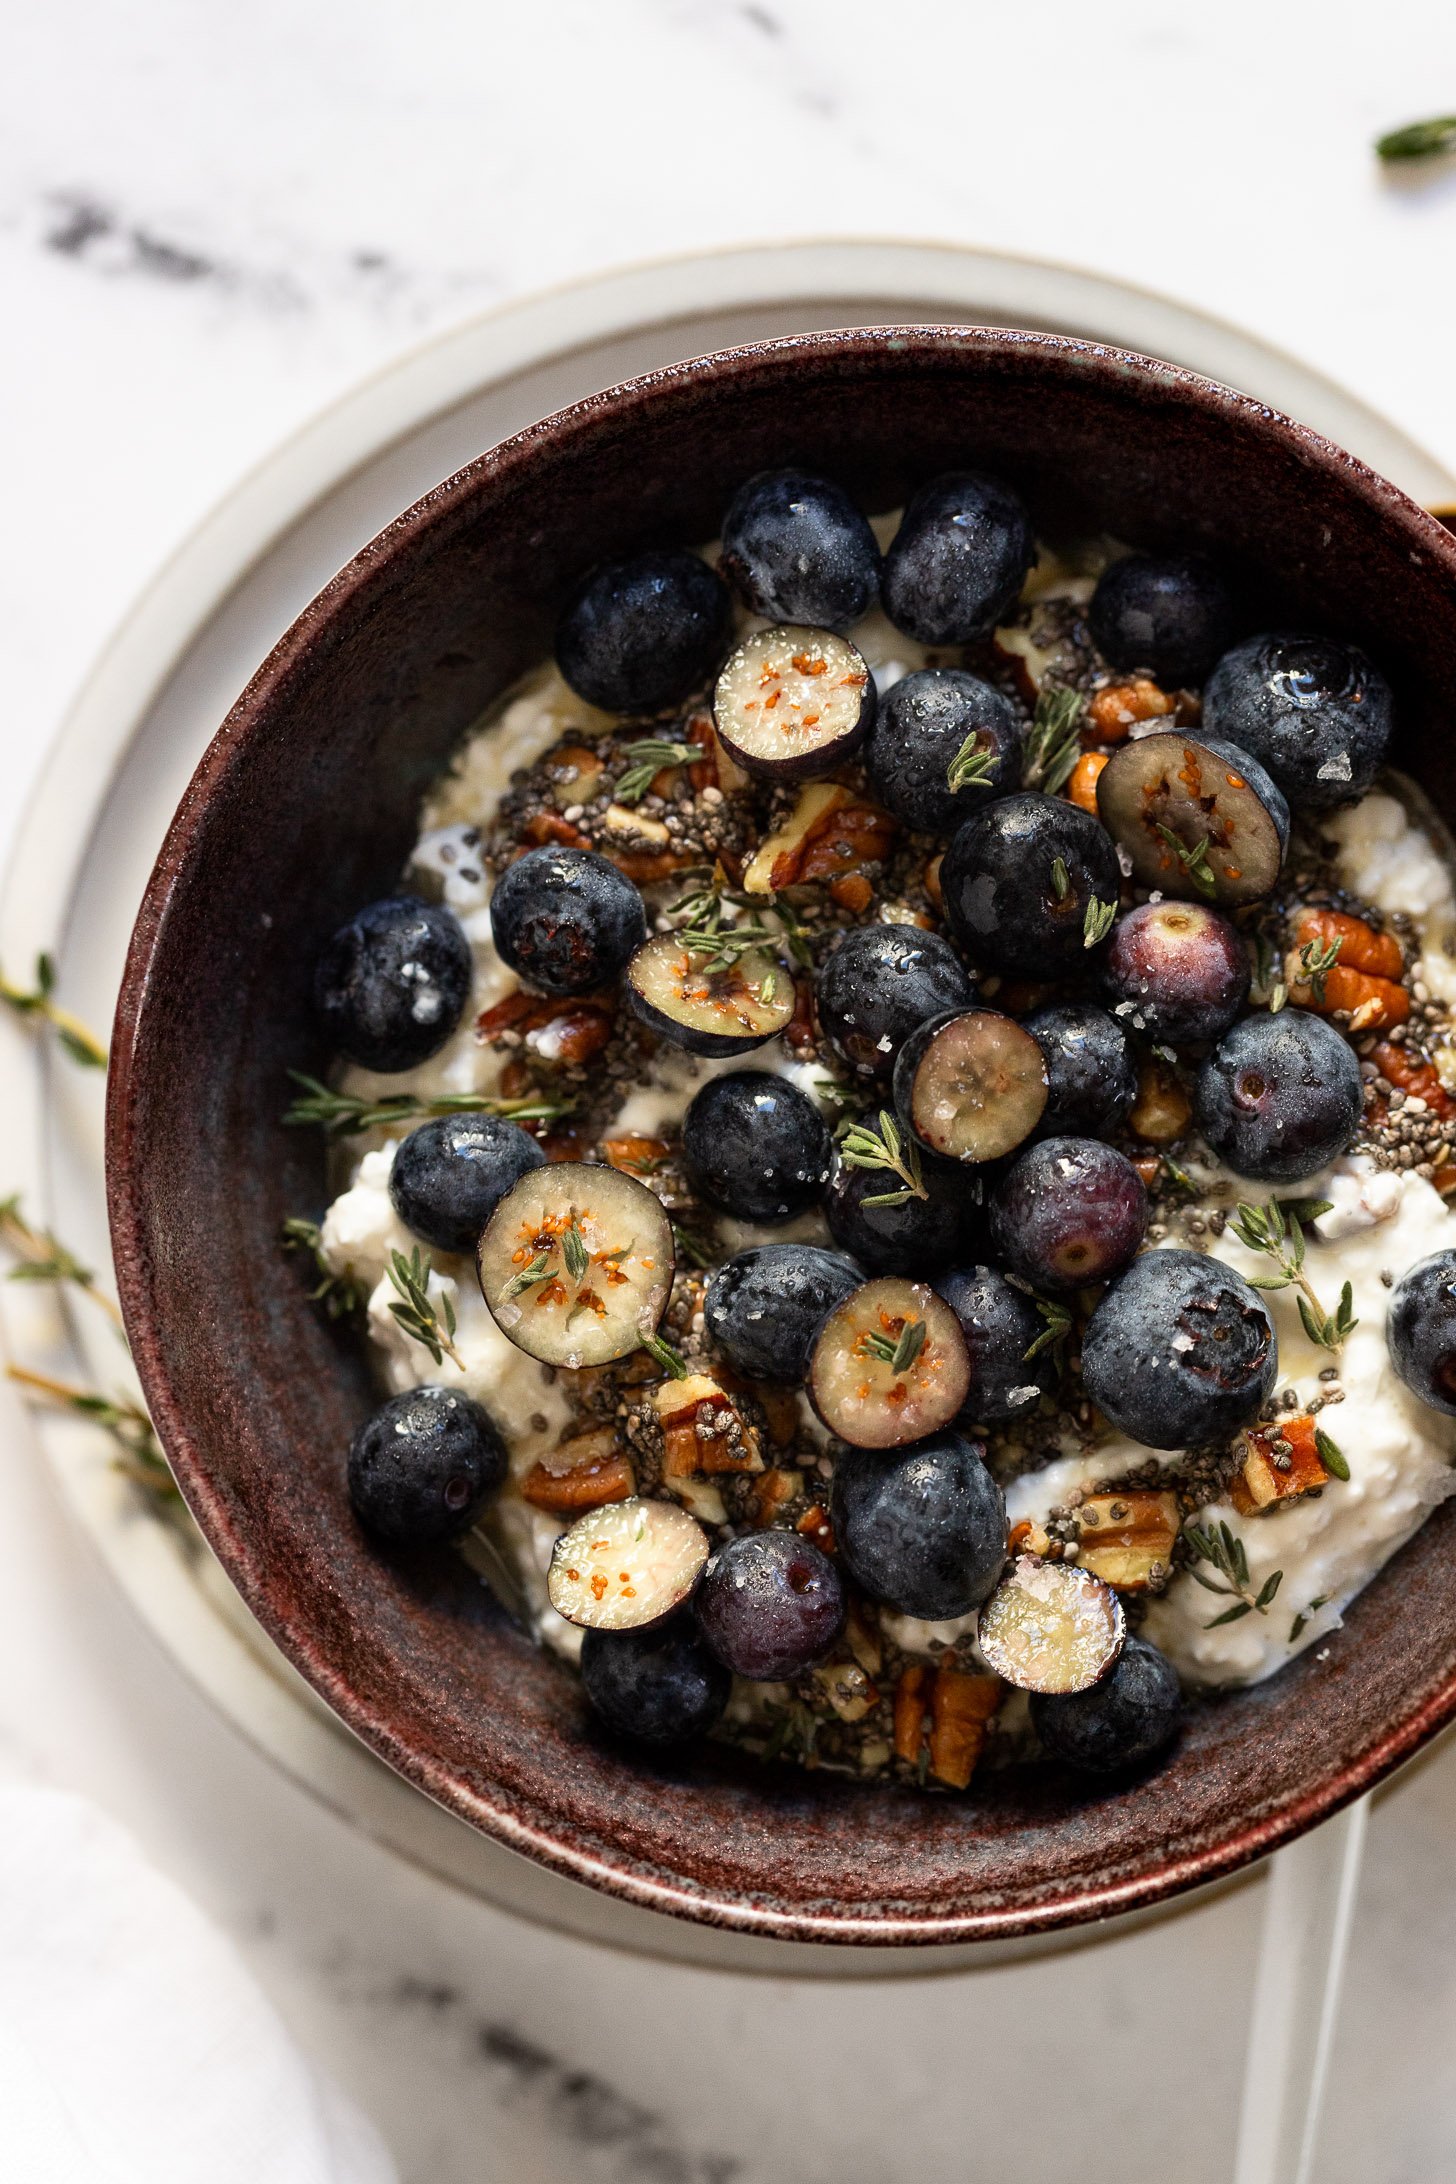 Overhead view of cottage cheese snack bowl with blueberries.